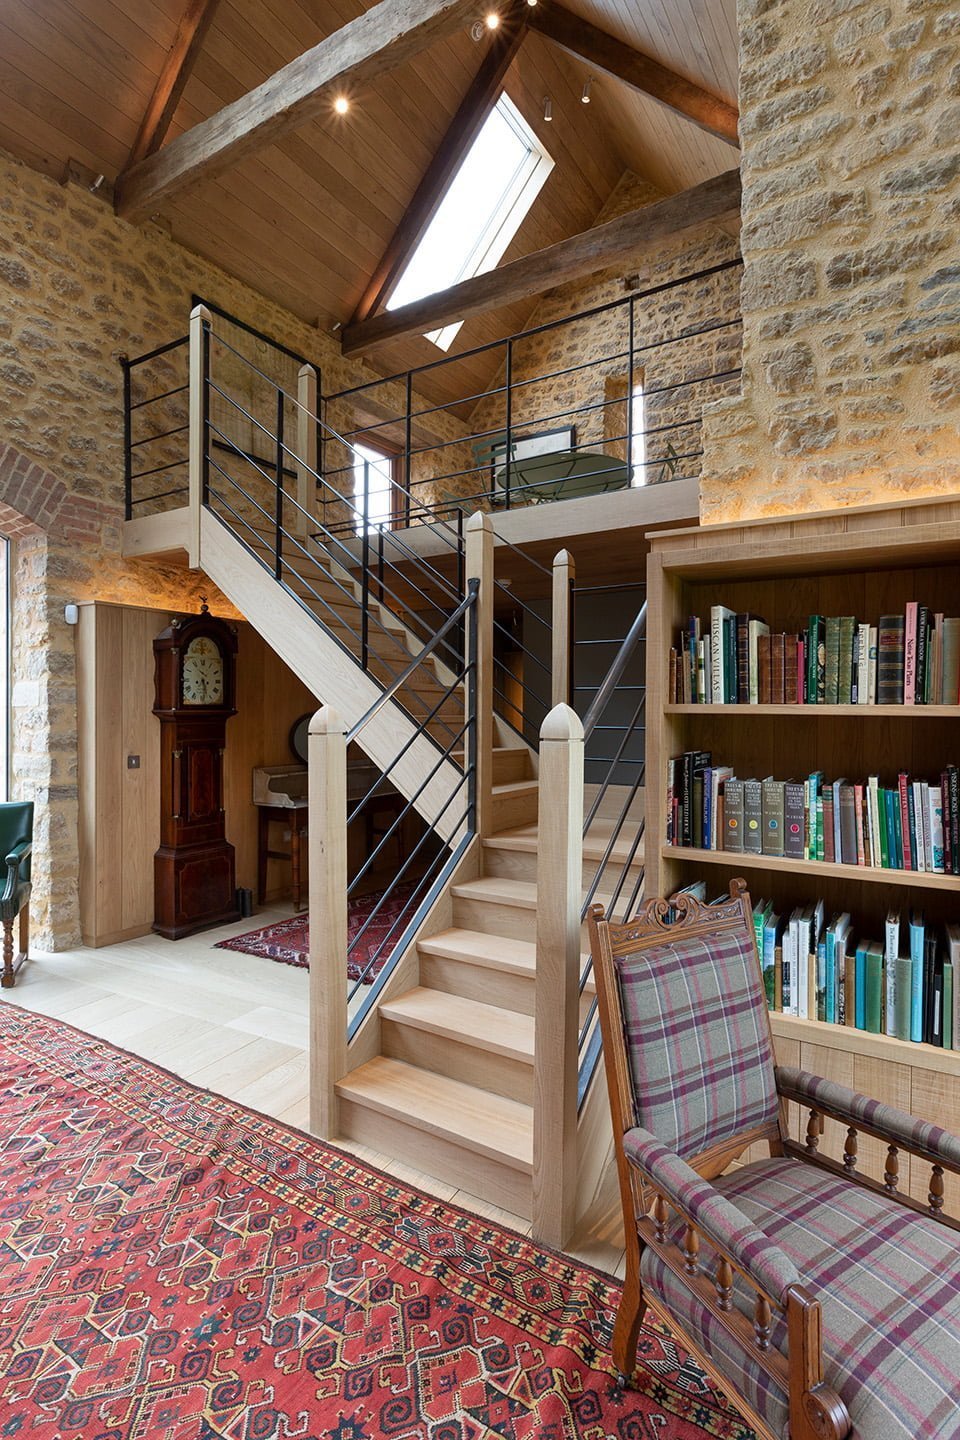 Sawn and brushed oak flooring and stairs in converted barn